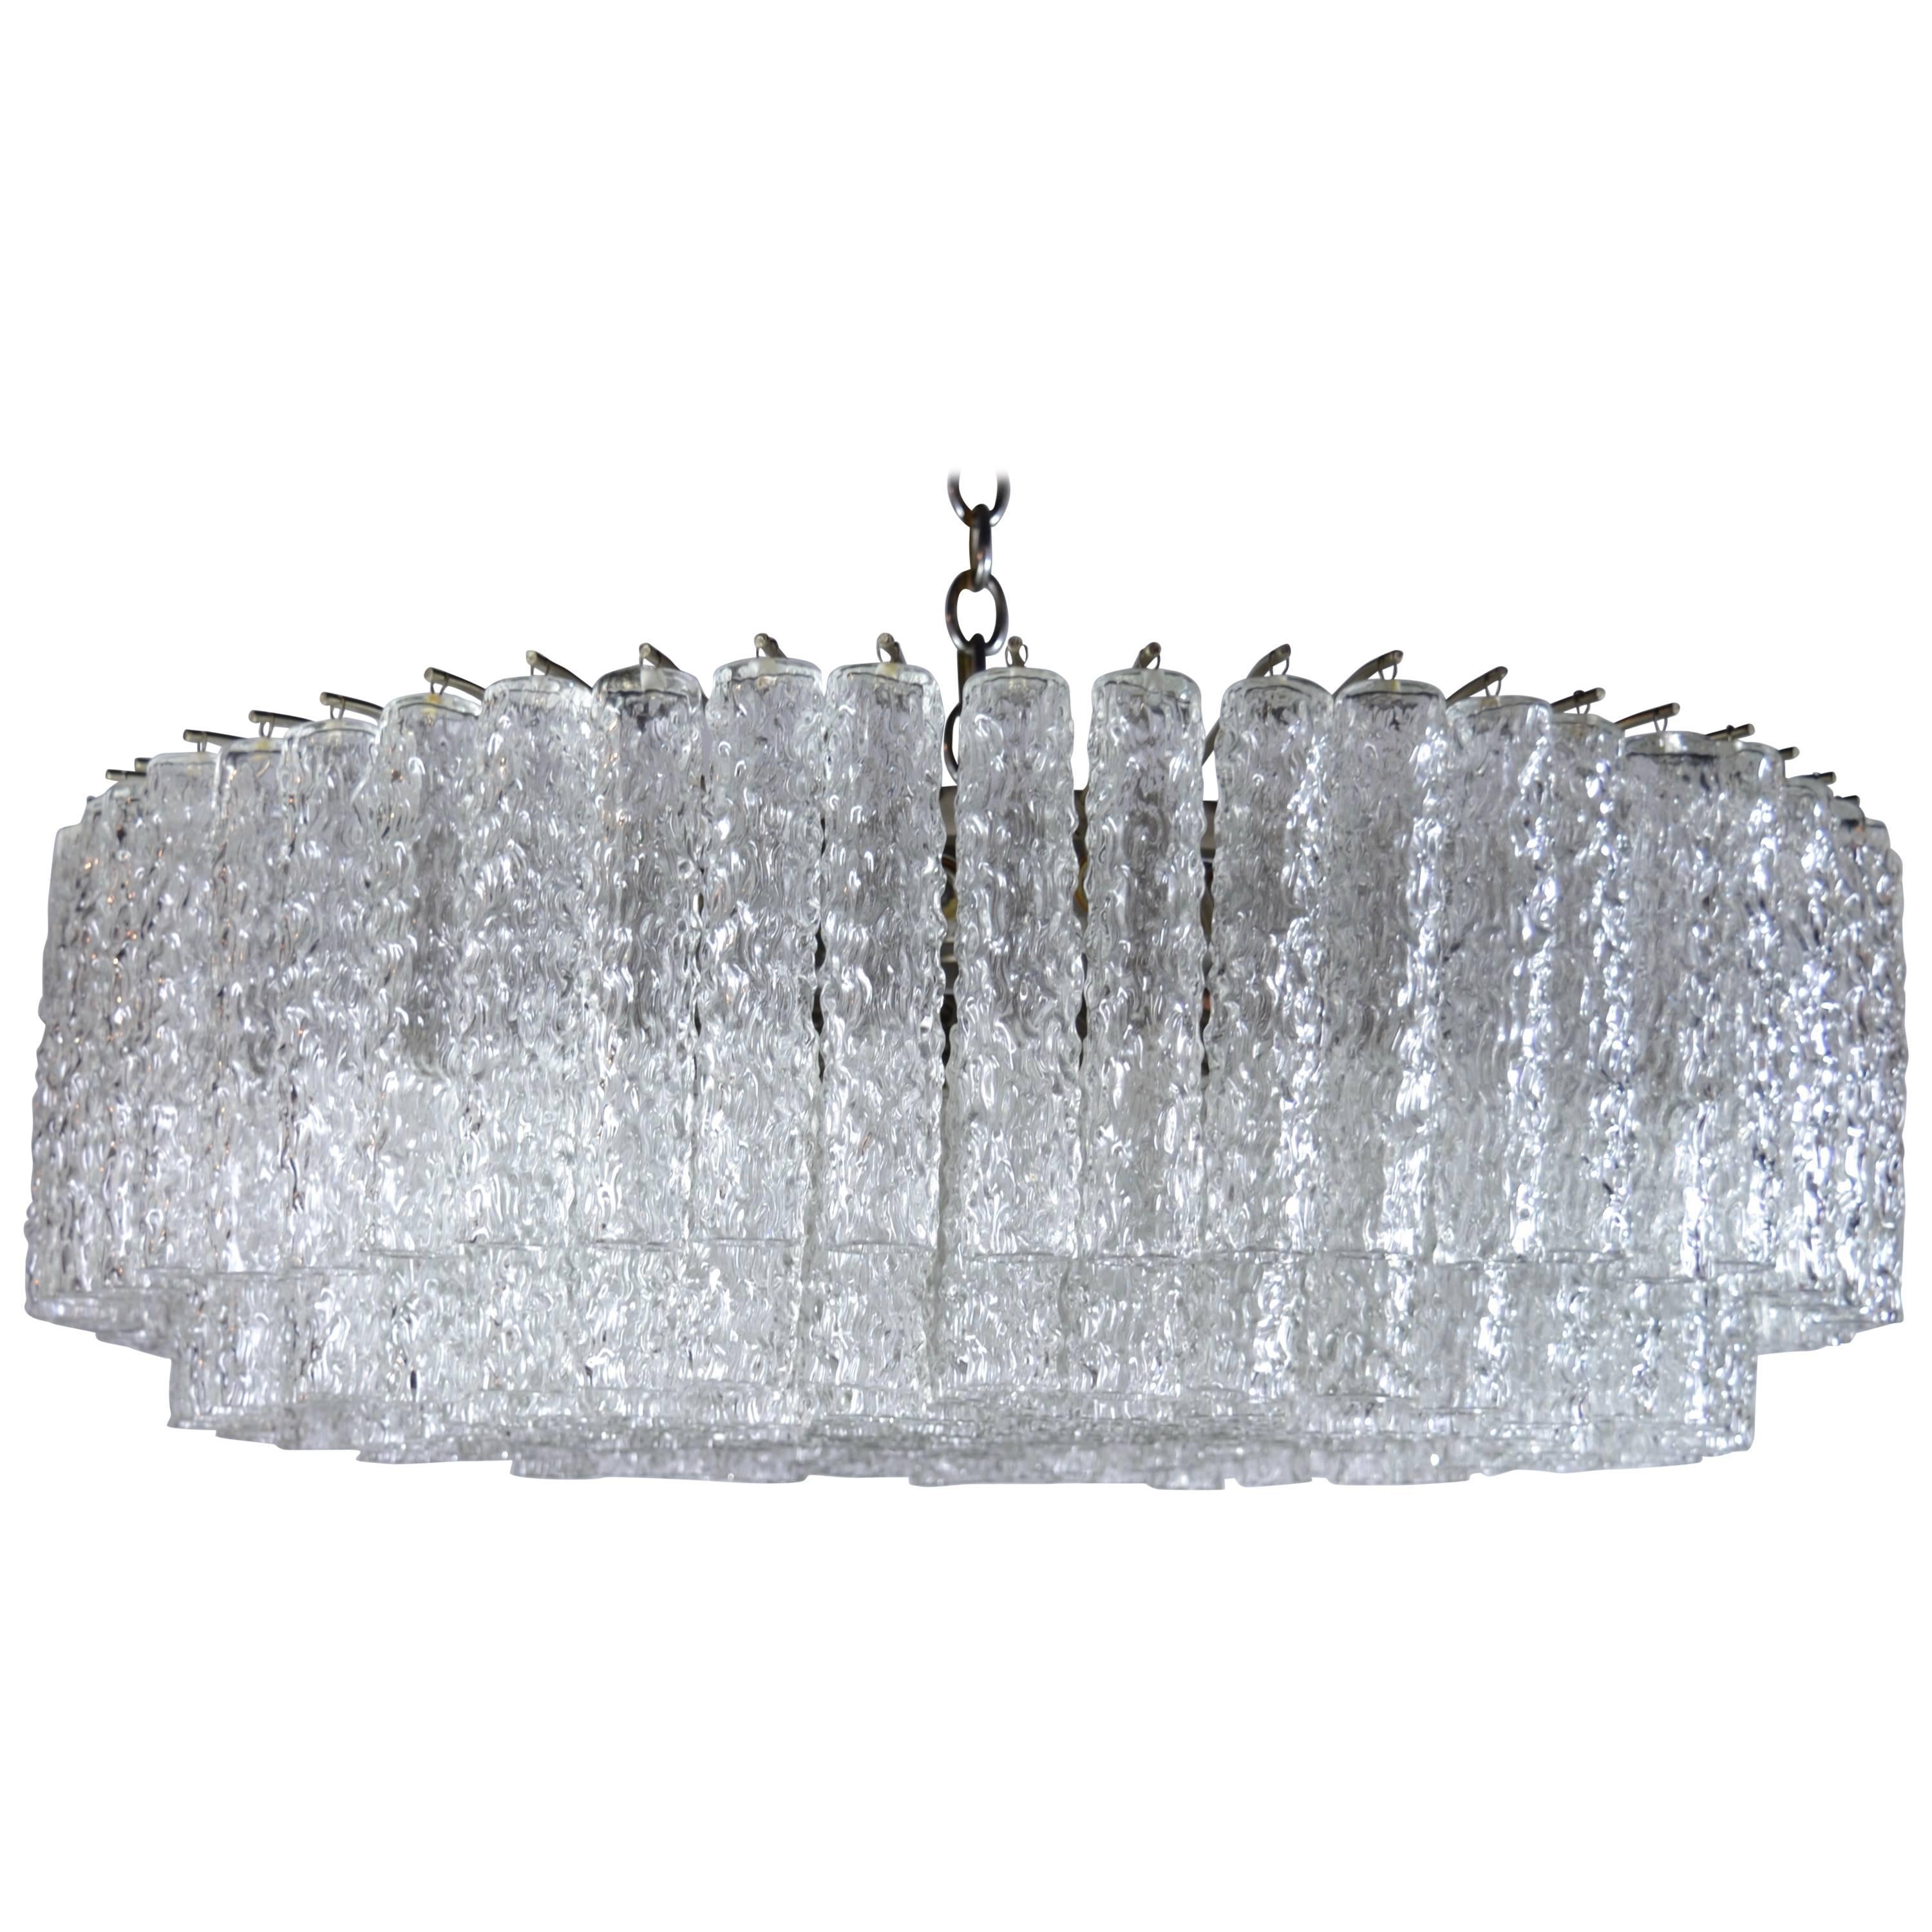 Monumental Tronchi Chandelier with Heavy Round Murano Glass Tubes, Italy 1970s